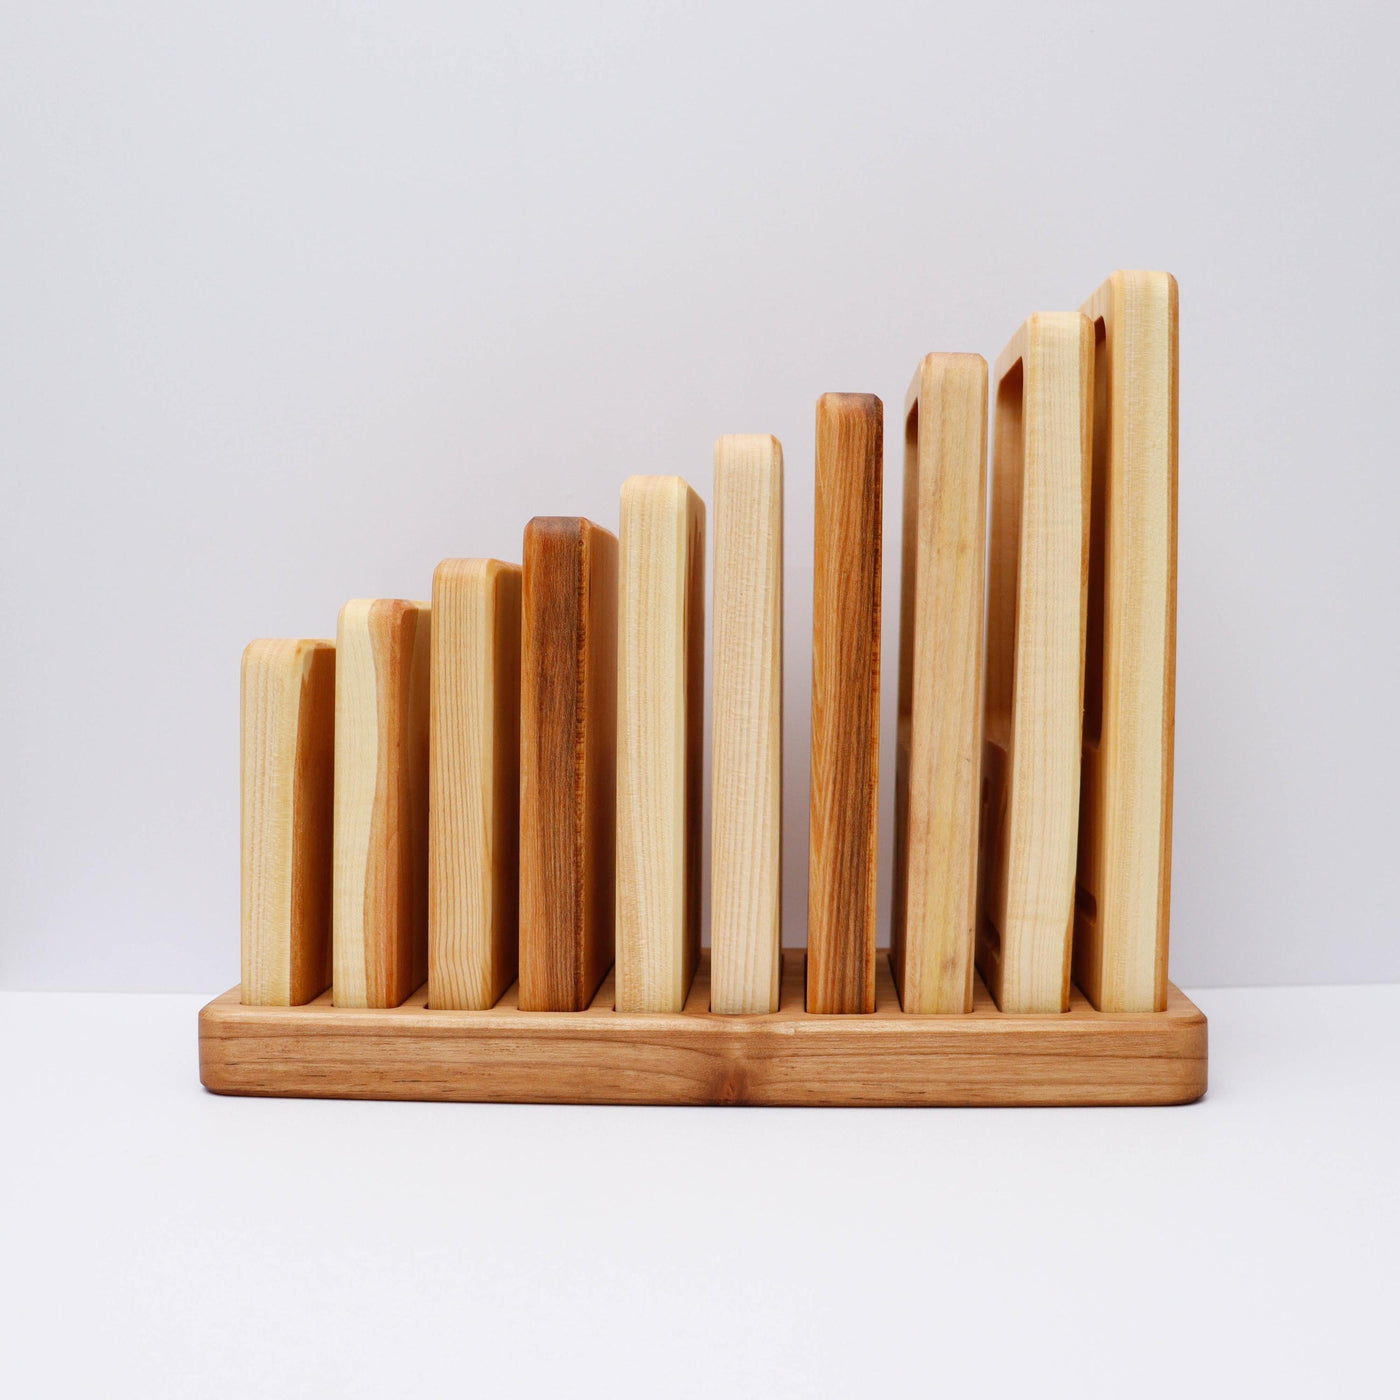 Wooden Chinese Number Tray by Oyuncak House